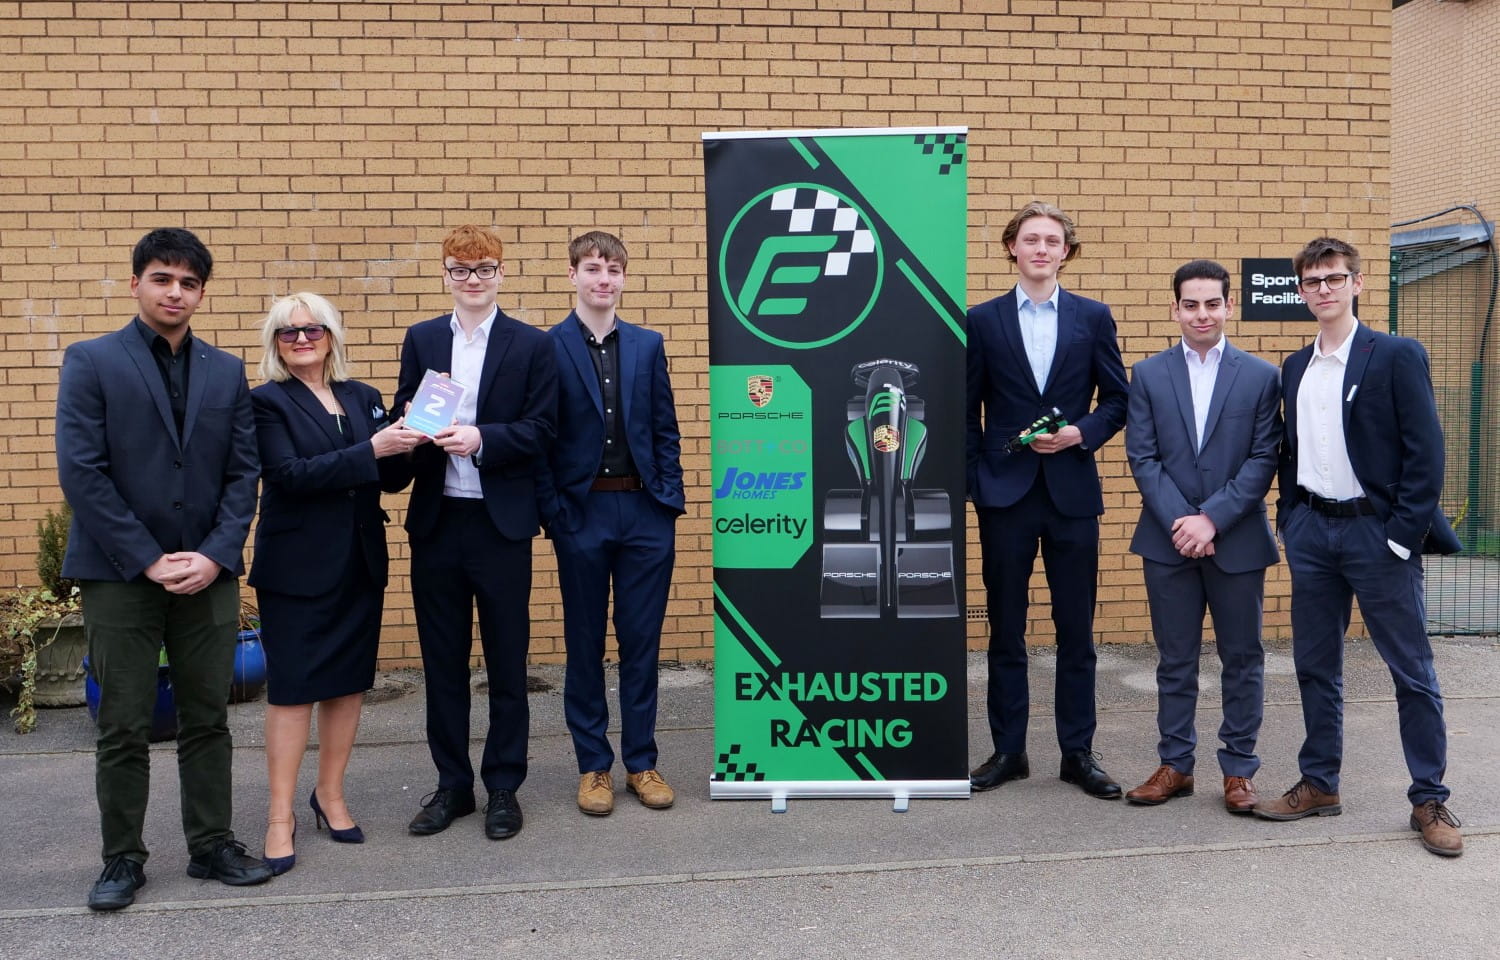 Wilmslow High School students qualify for national final of F1 design competition with help from Jones Homes